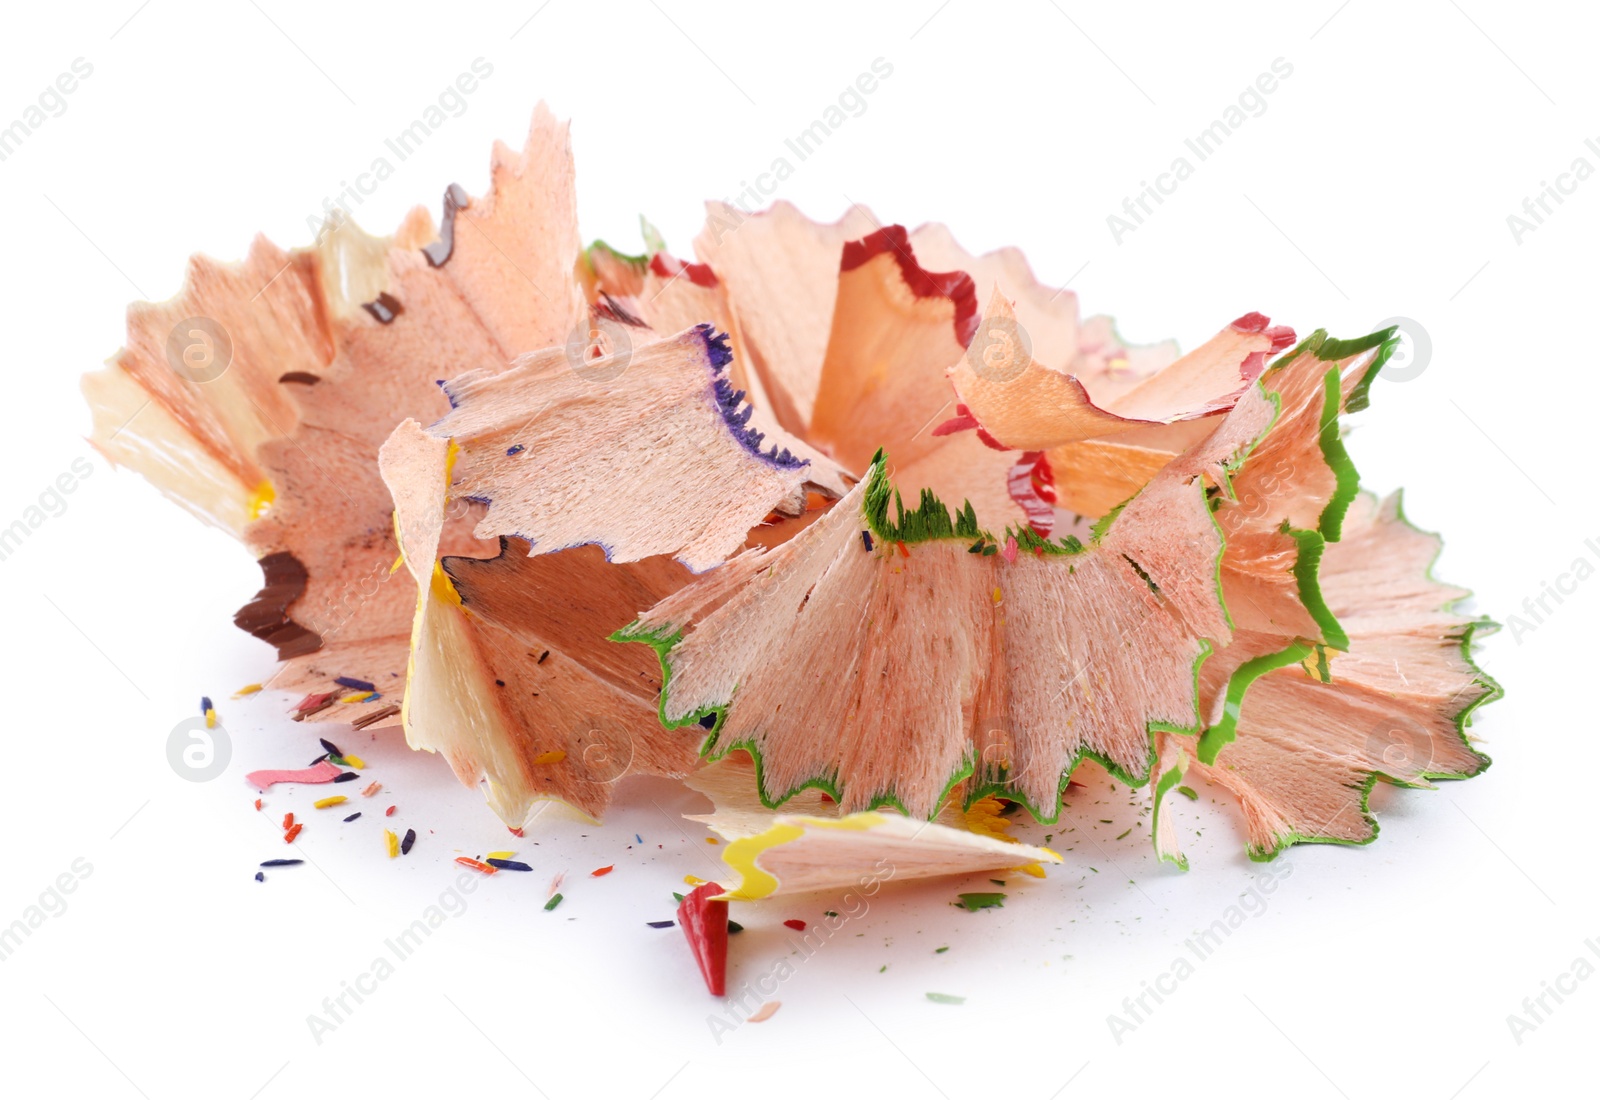 Photo of Pile of colorful pencil shavings on white background, closeup